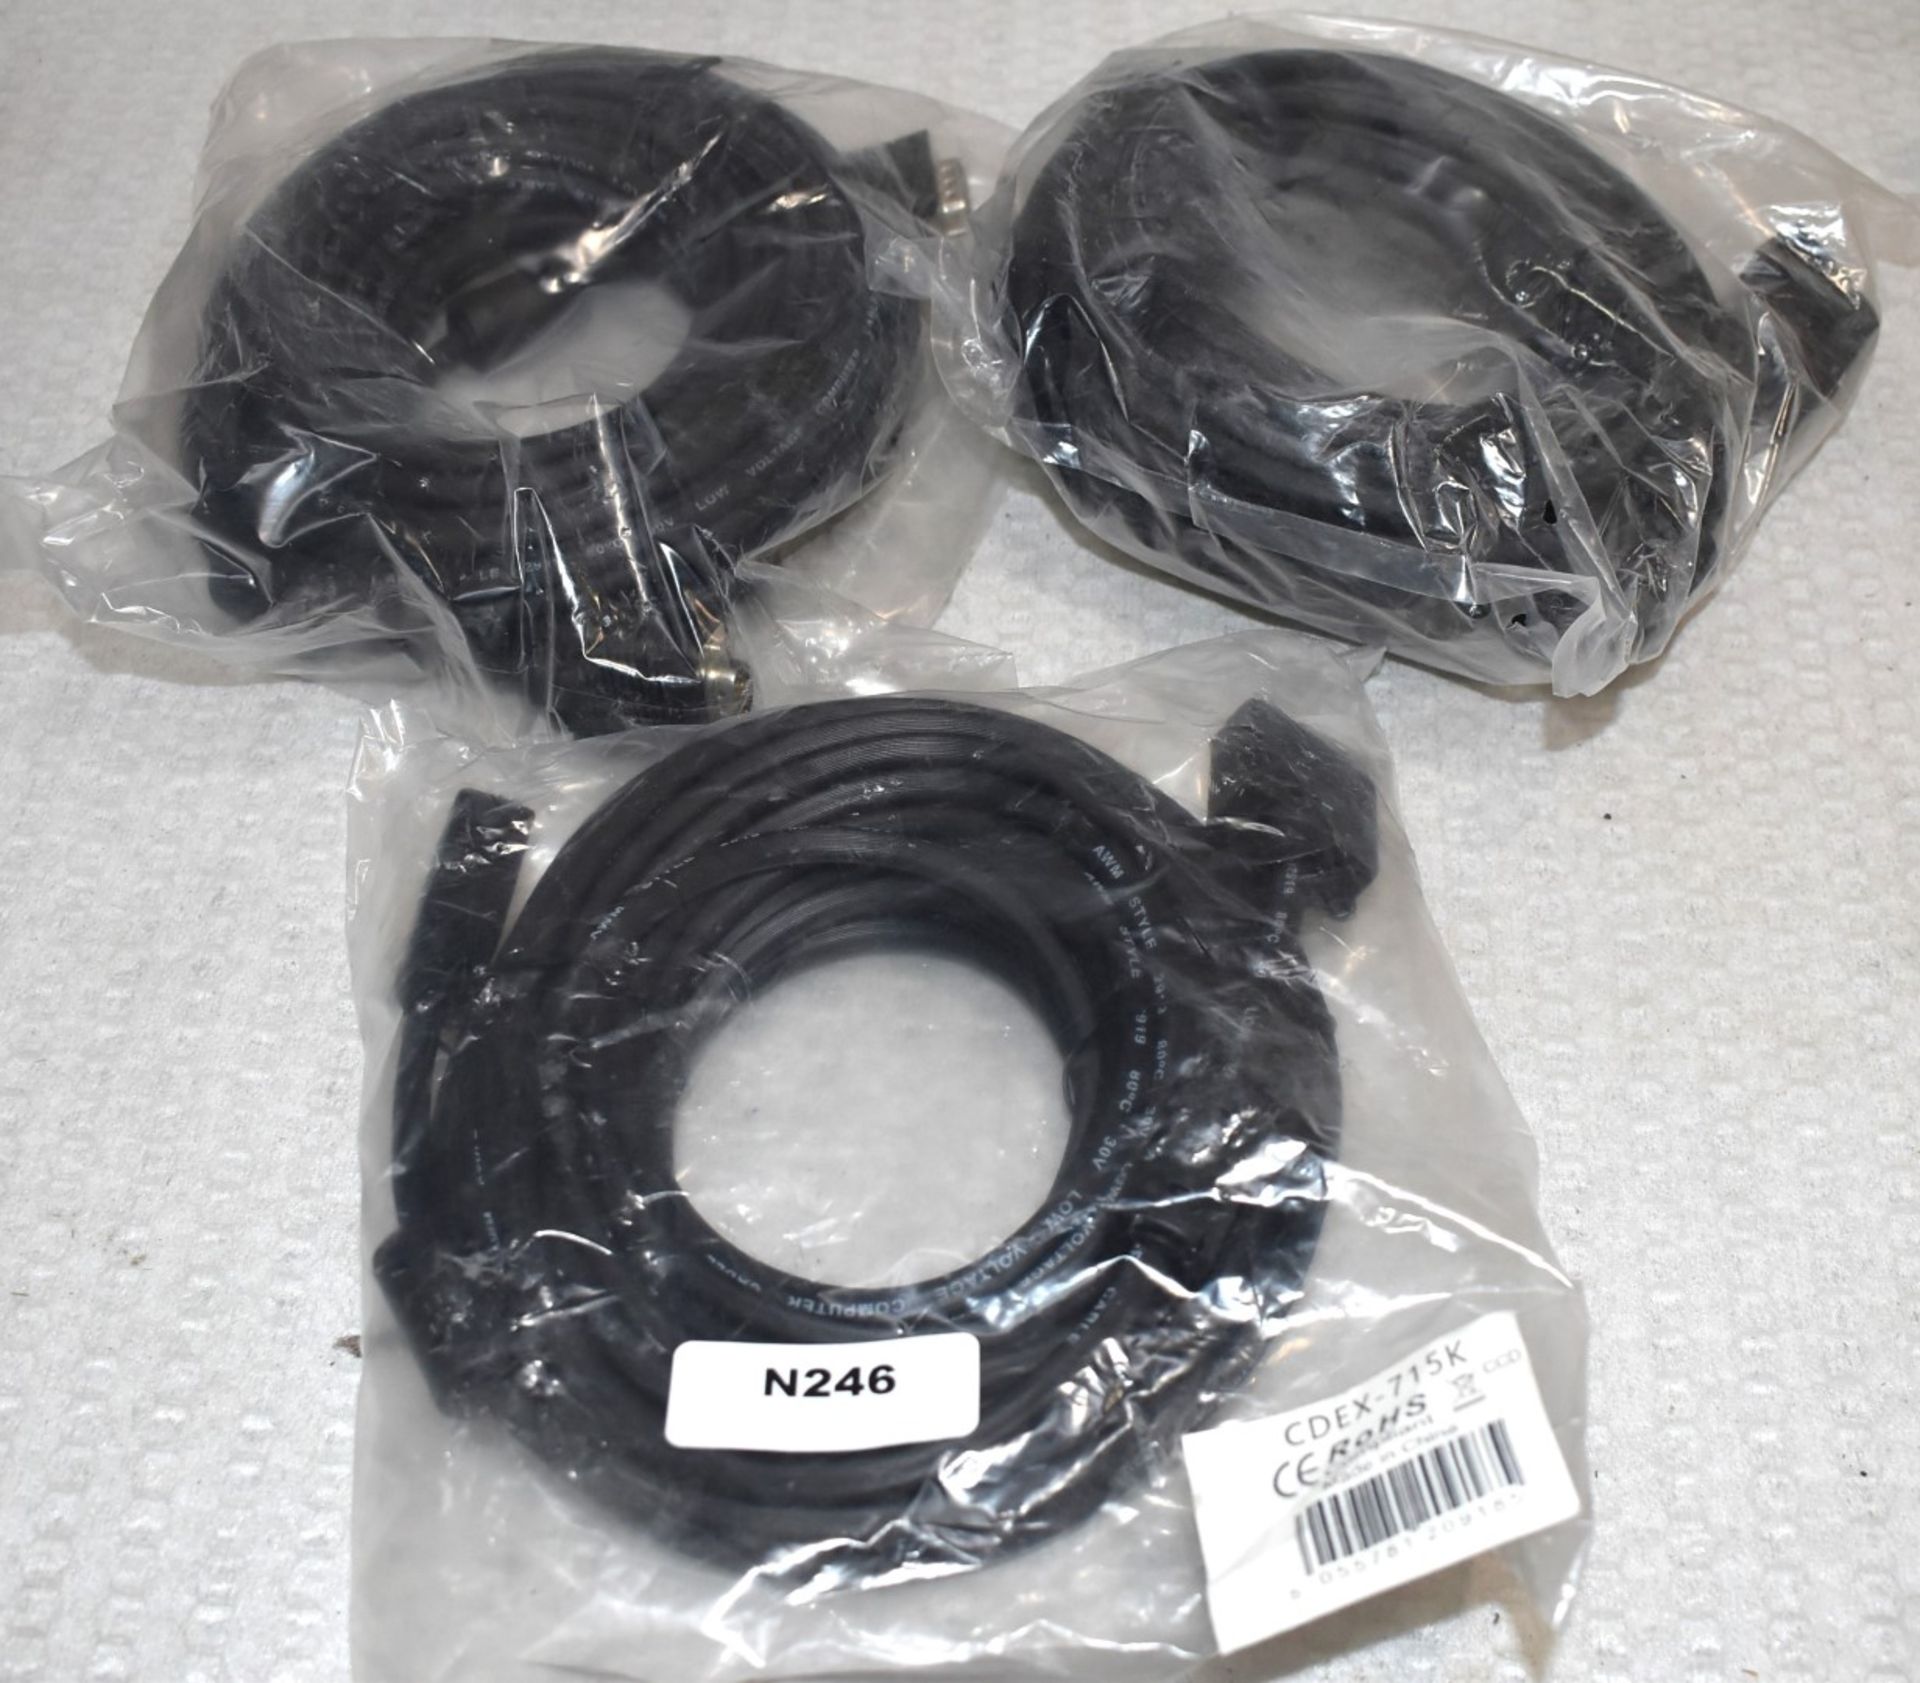 3 x CDEX 715K Cables Direct VGA Cables - 15 Meter Length - New in Packets - RRP £70 - Image 2 of 7